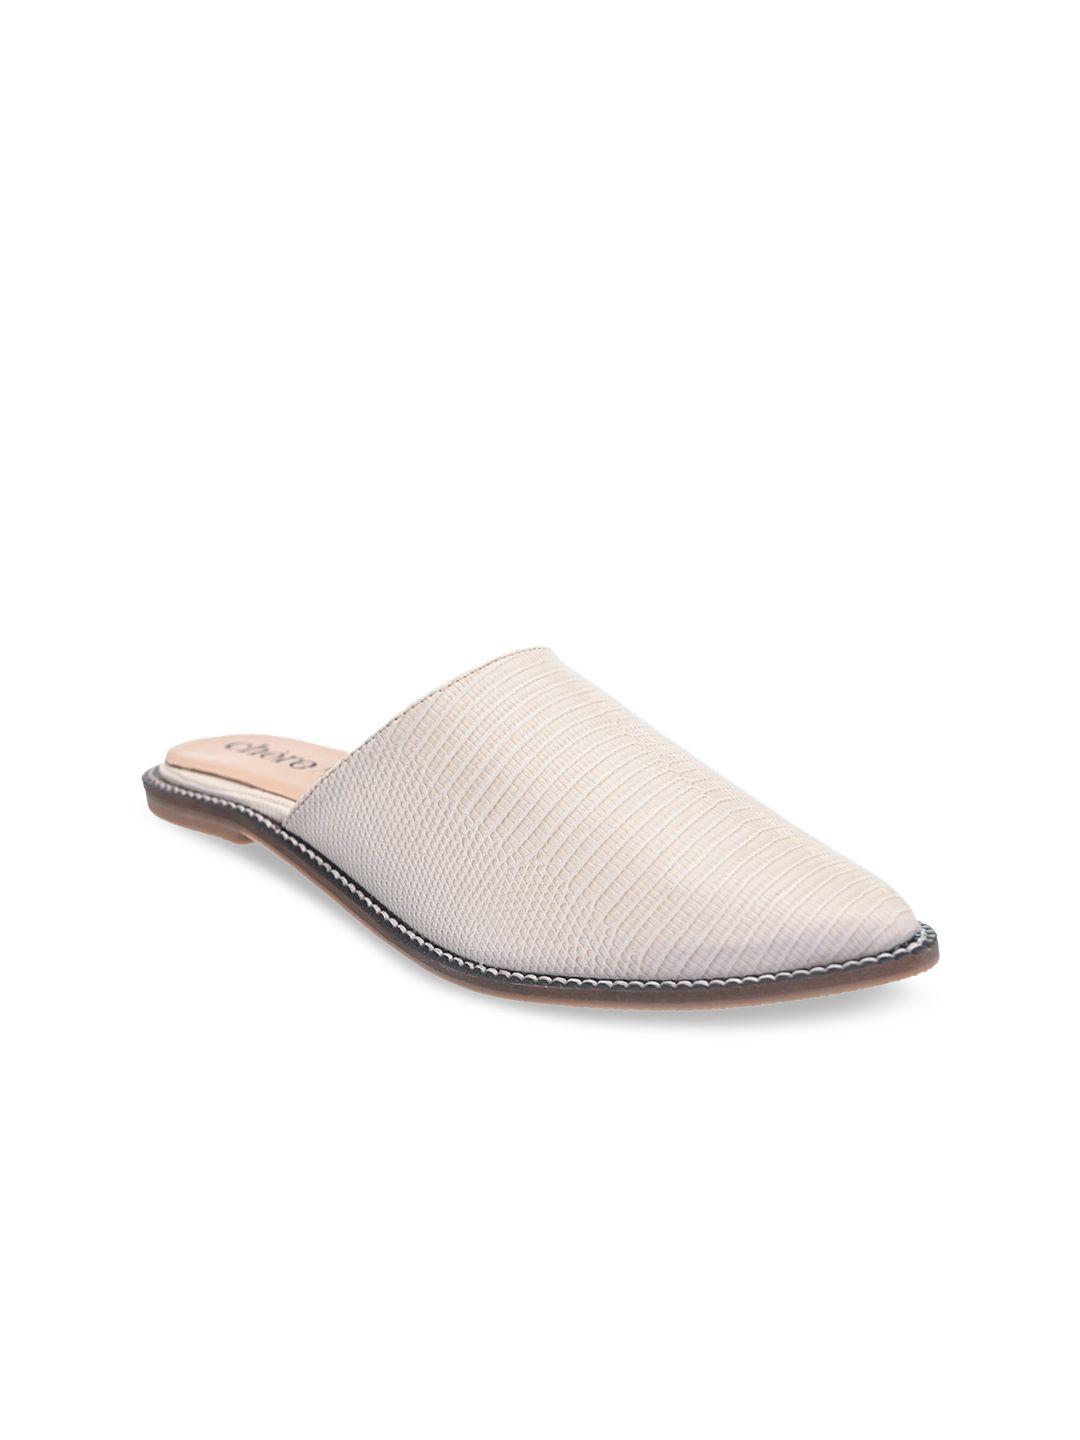 chere pointed toe textured mules